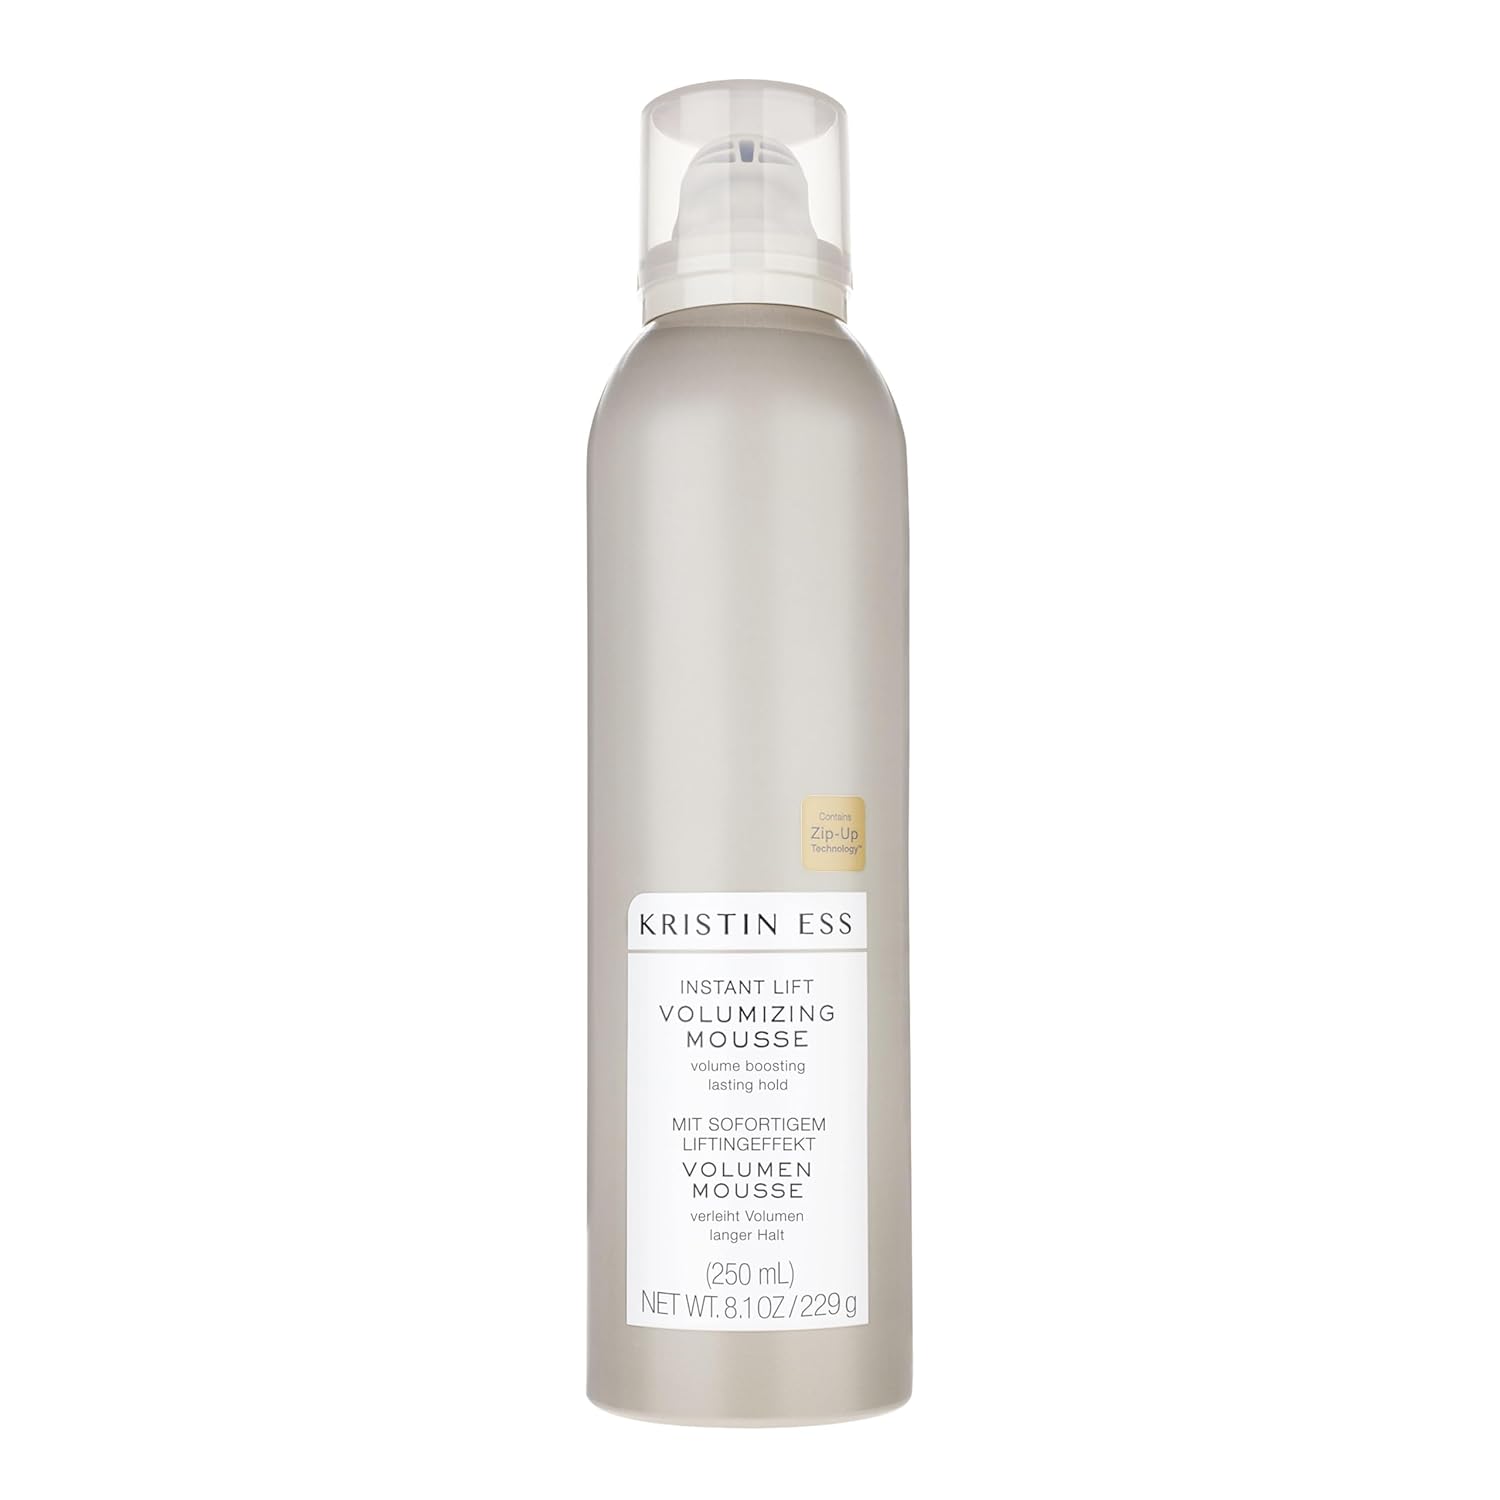 Kristin Ess Hair Volume Mousse Instant Lift Volumizing Mousse High-Quality Hair Care for Instant Volume, Lasting Hold without Gluing All Hair Types No Sulphates No Parabens 250 ml